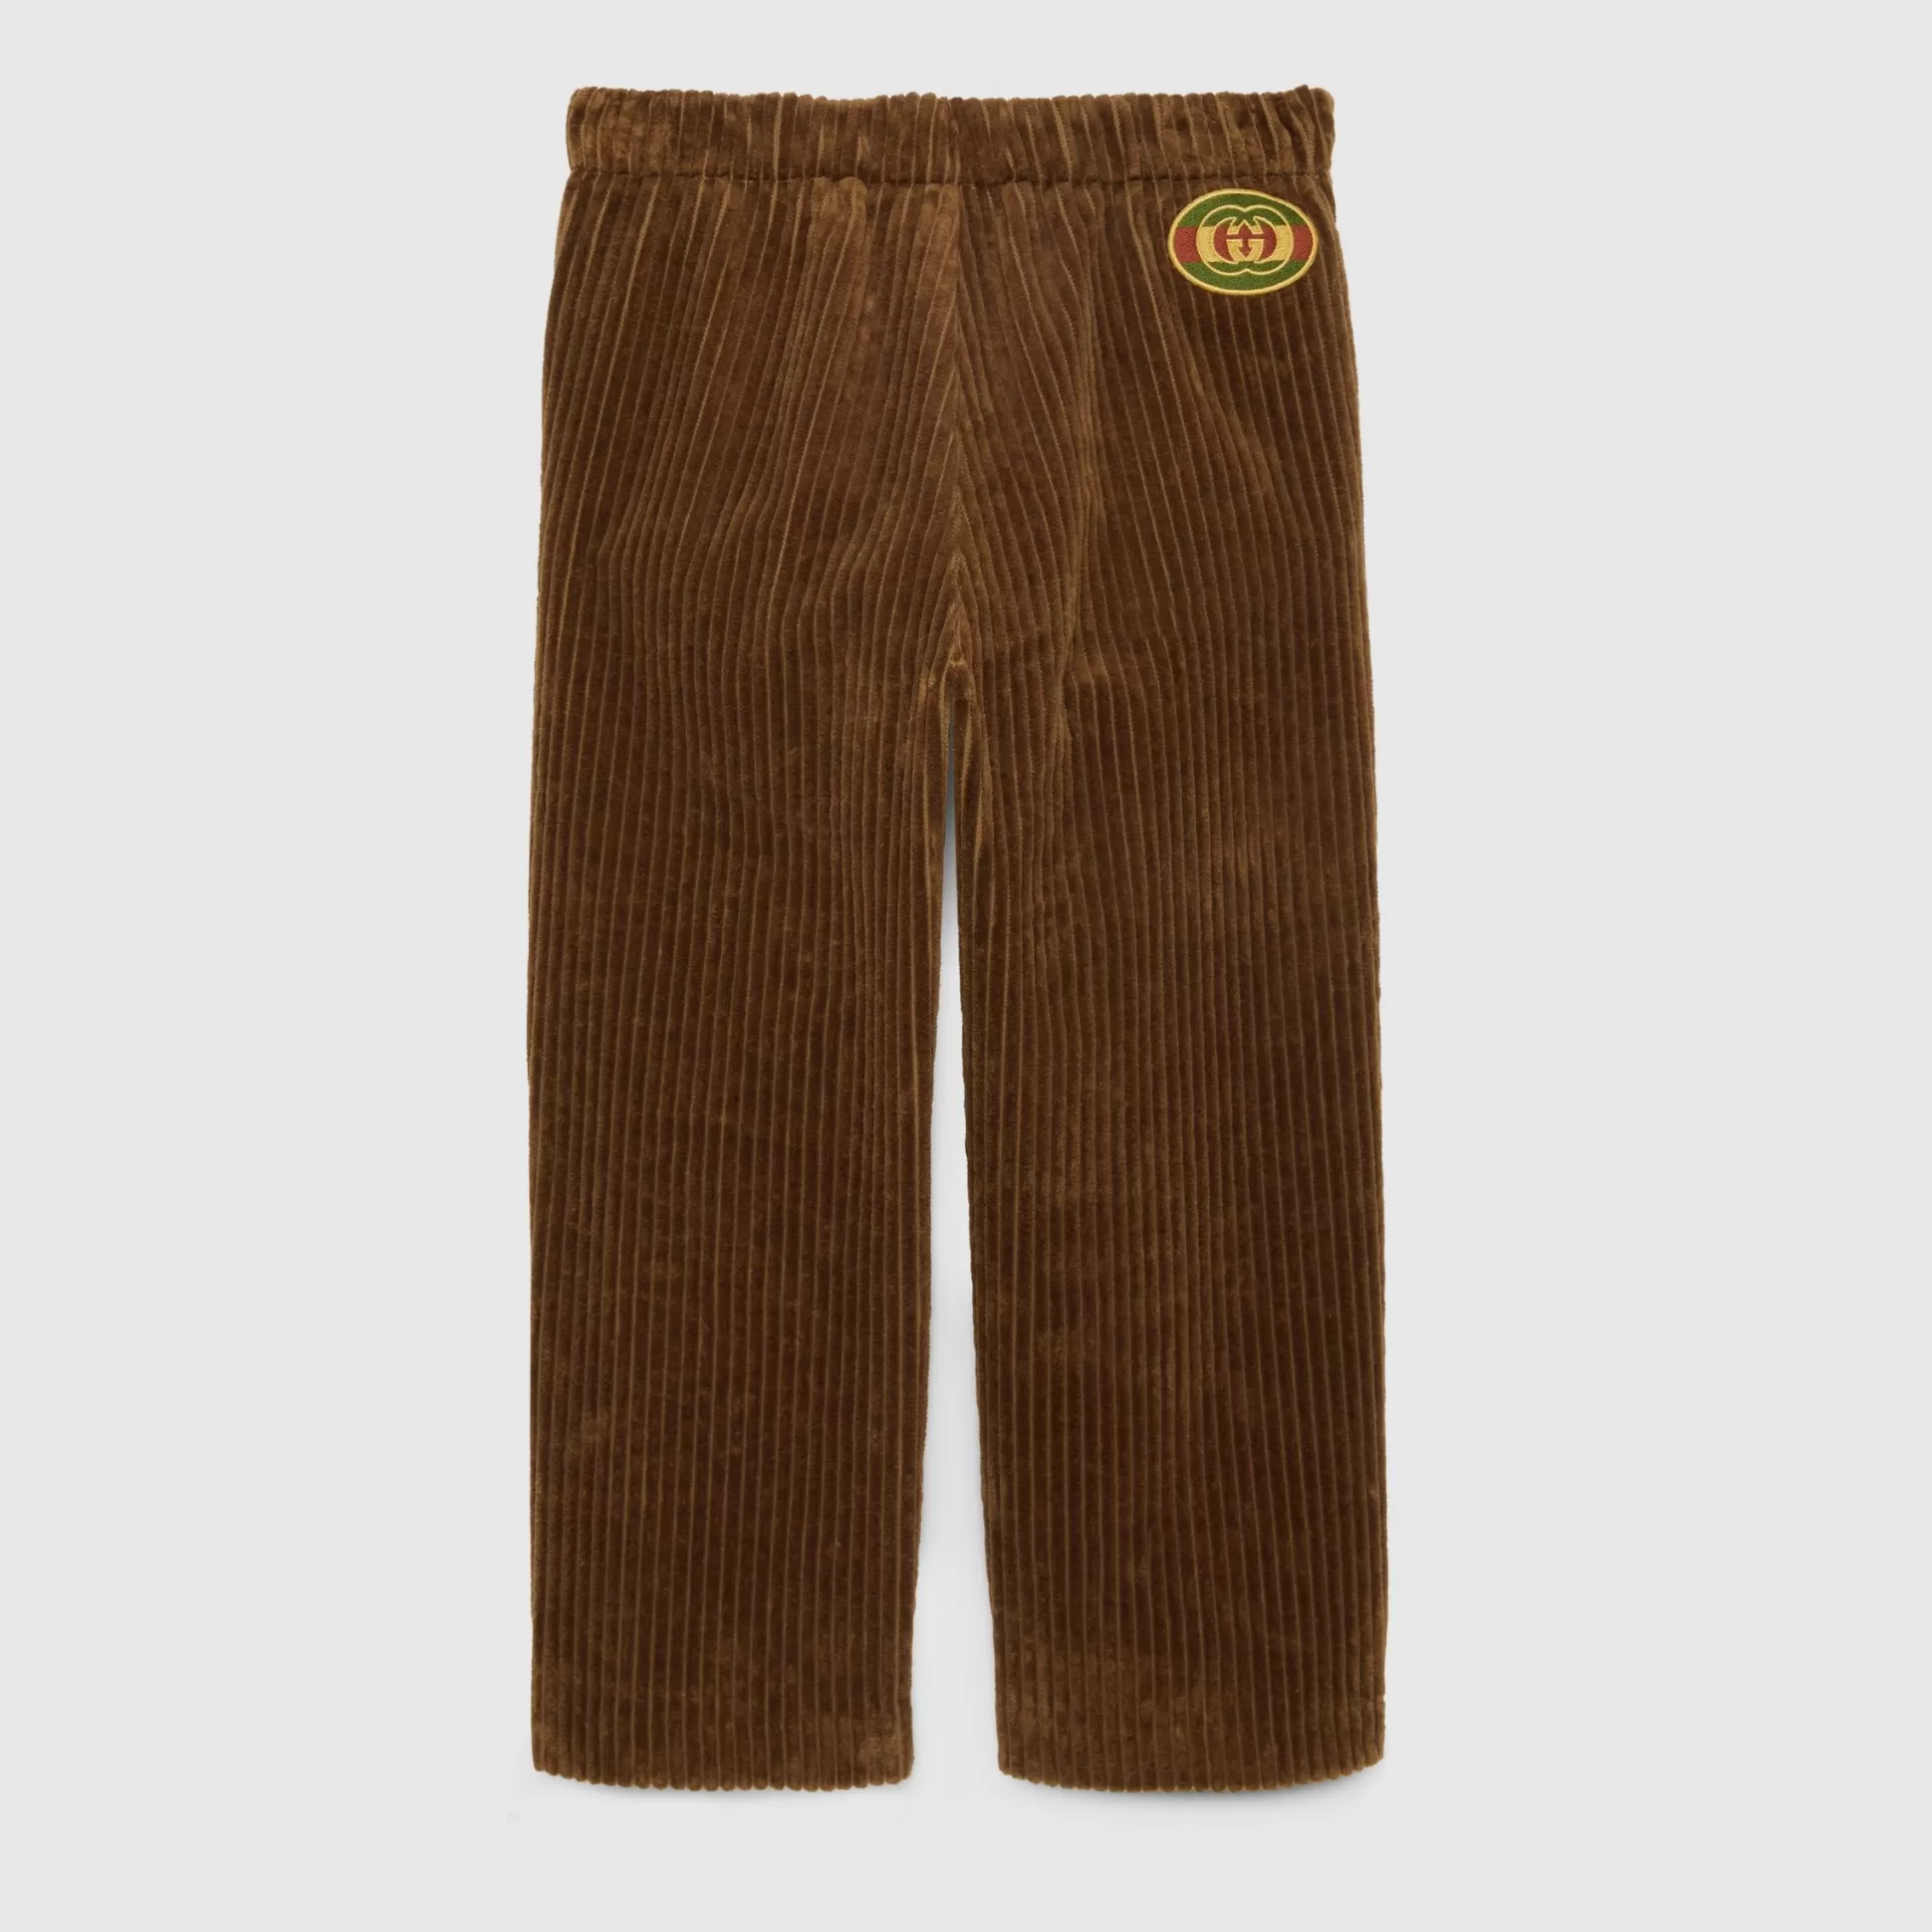 GUCCI Children'S Corduroy Velvet Pant With Patch-Children Clothing (4-12 Years)